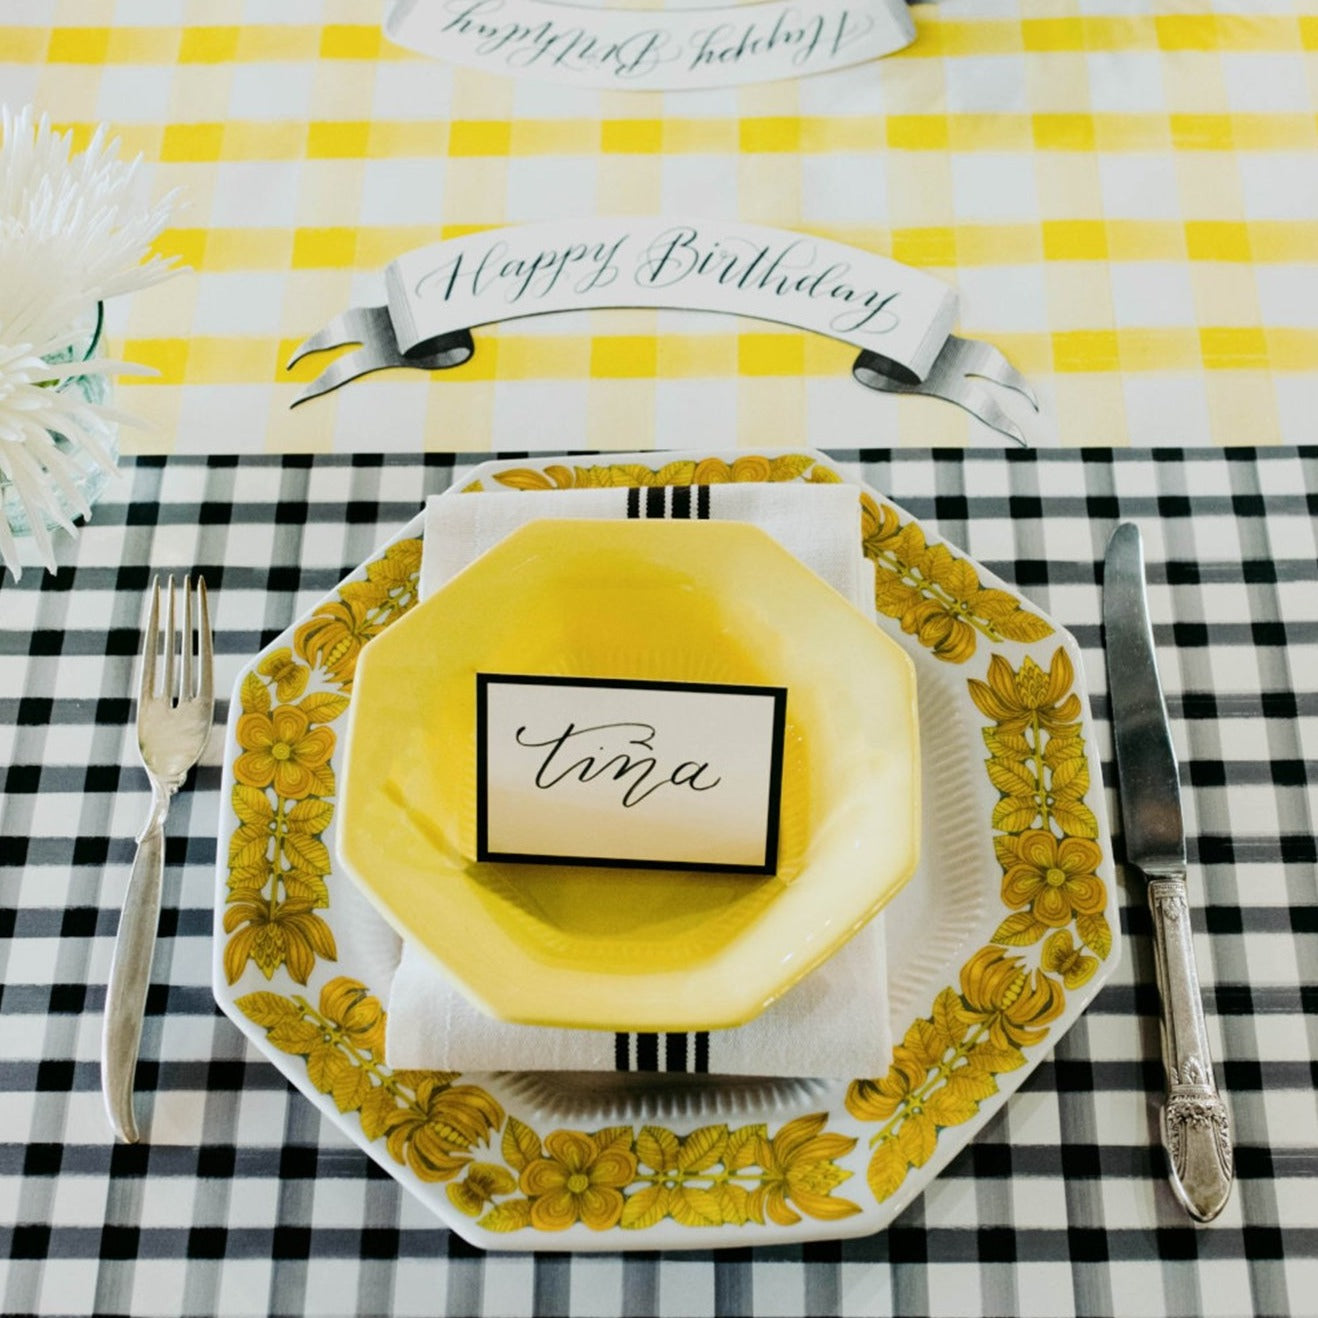 a photo of the black painted check paper placemat used in a table sitting. They have used yellow as the accent color in the dishes and table runner 